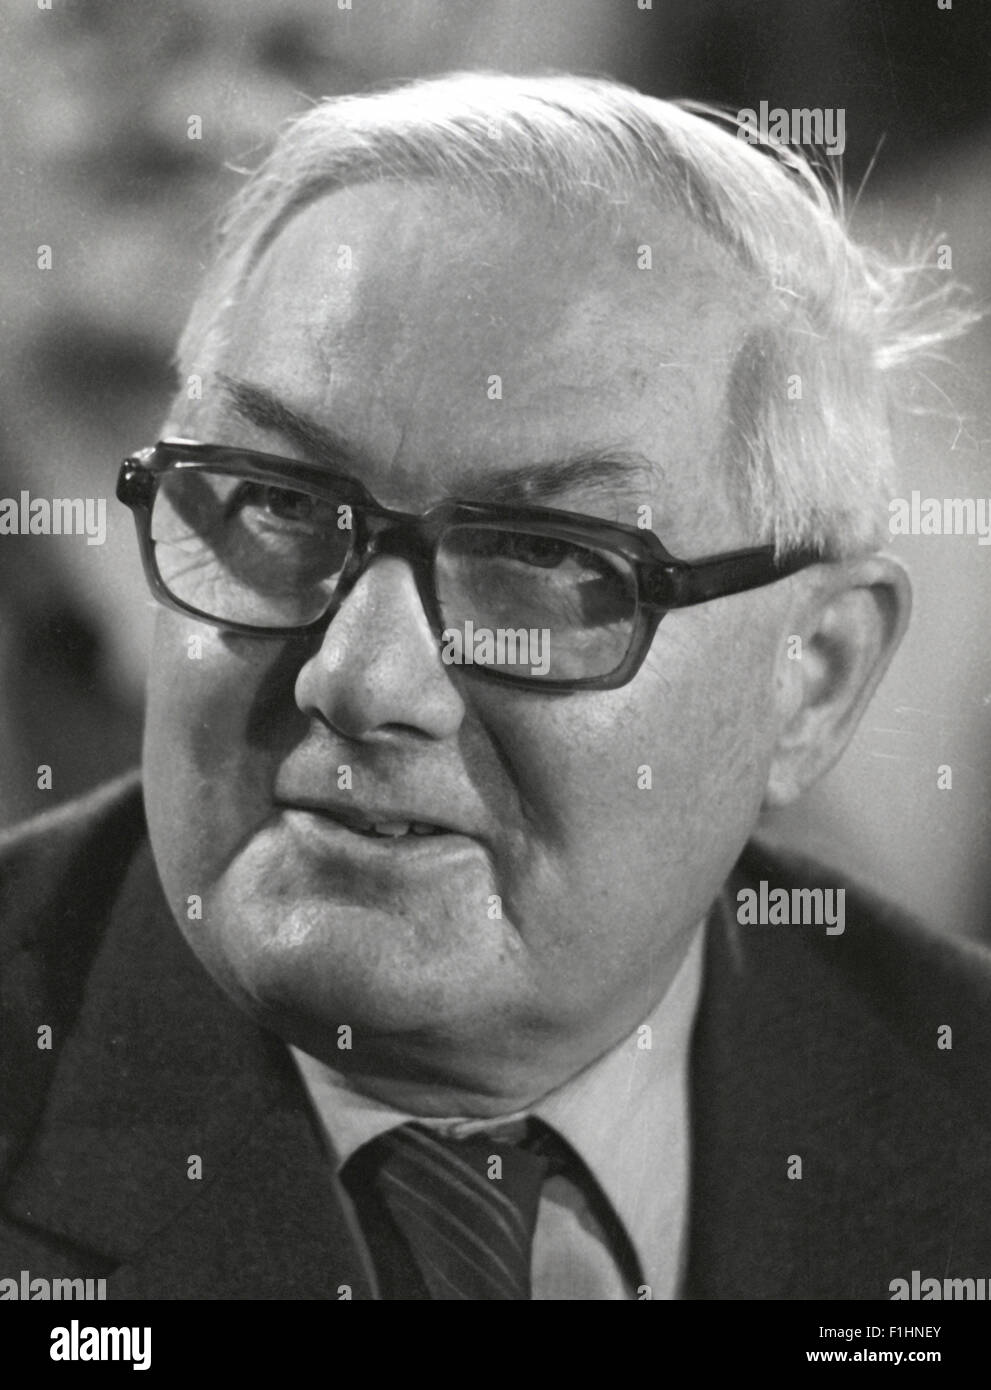 James Callaghan Lord Callaghan MP former UK prime minister. 1984 image. Stock Photo